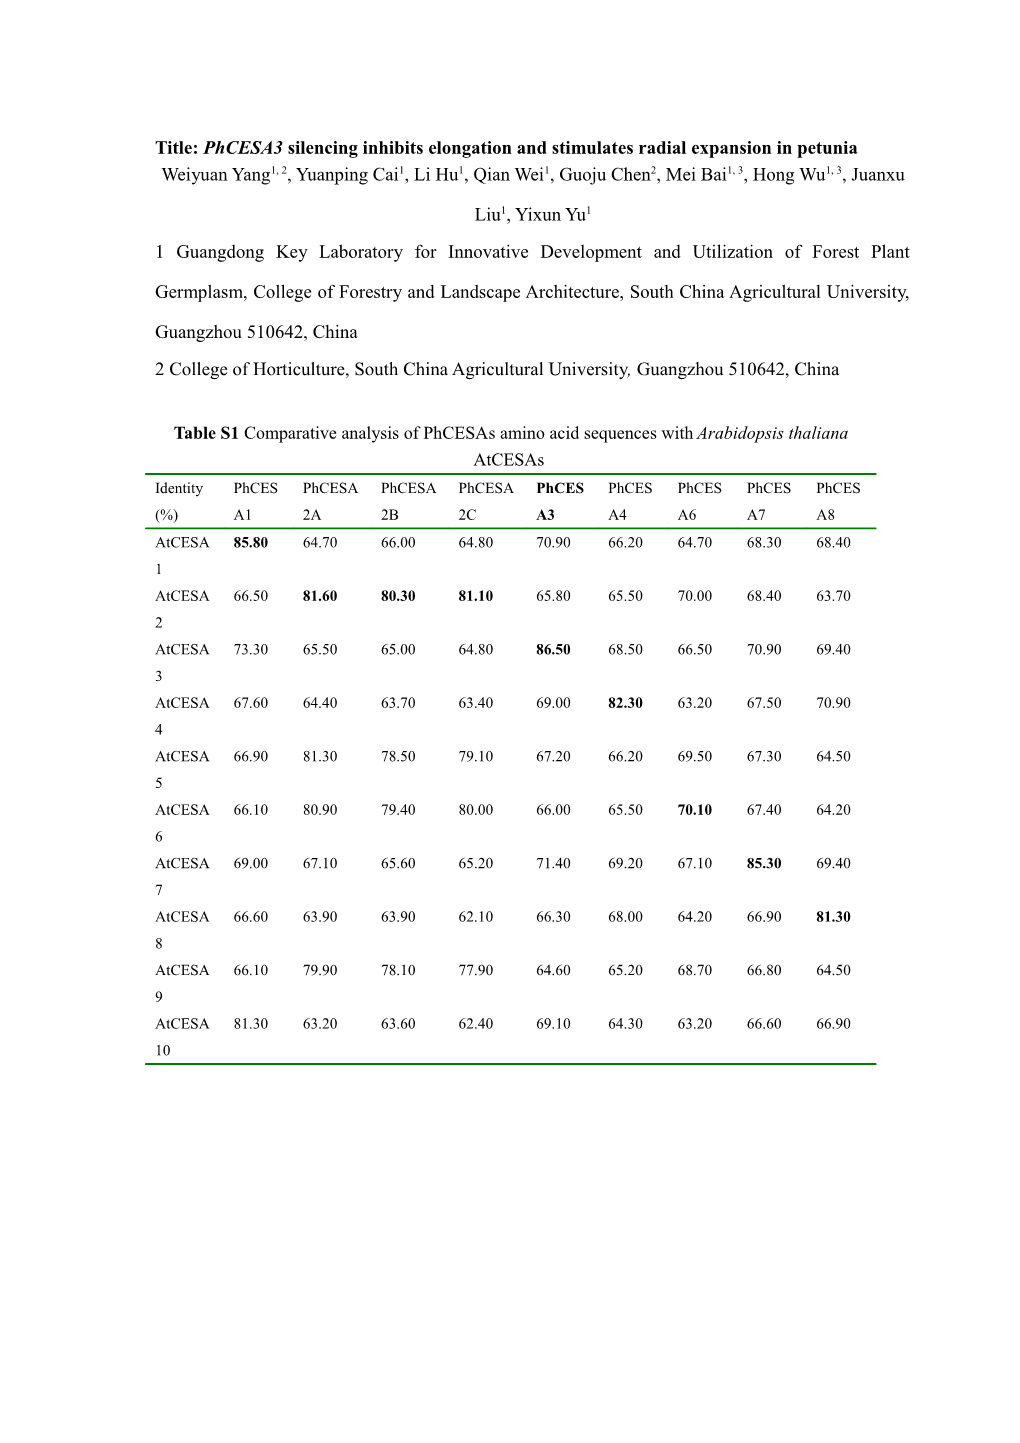 Supplemental Table 2 the Effects of Pheol1 and Pheol2 Suppression on the Longevity of Petunia